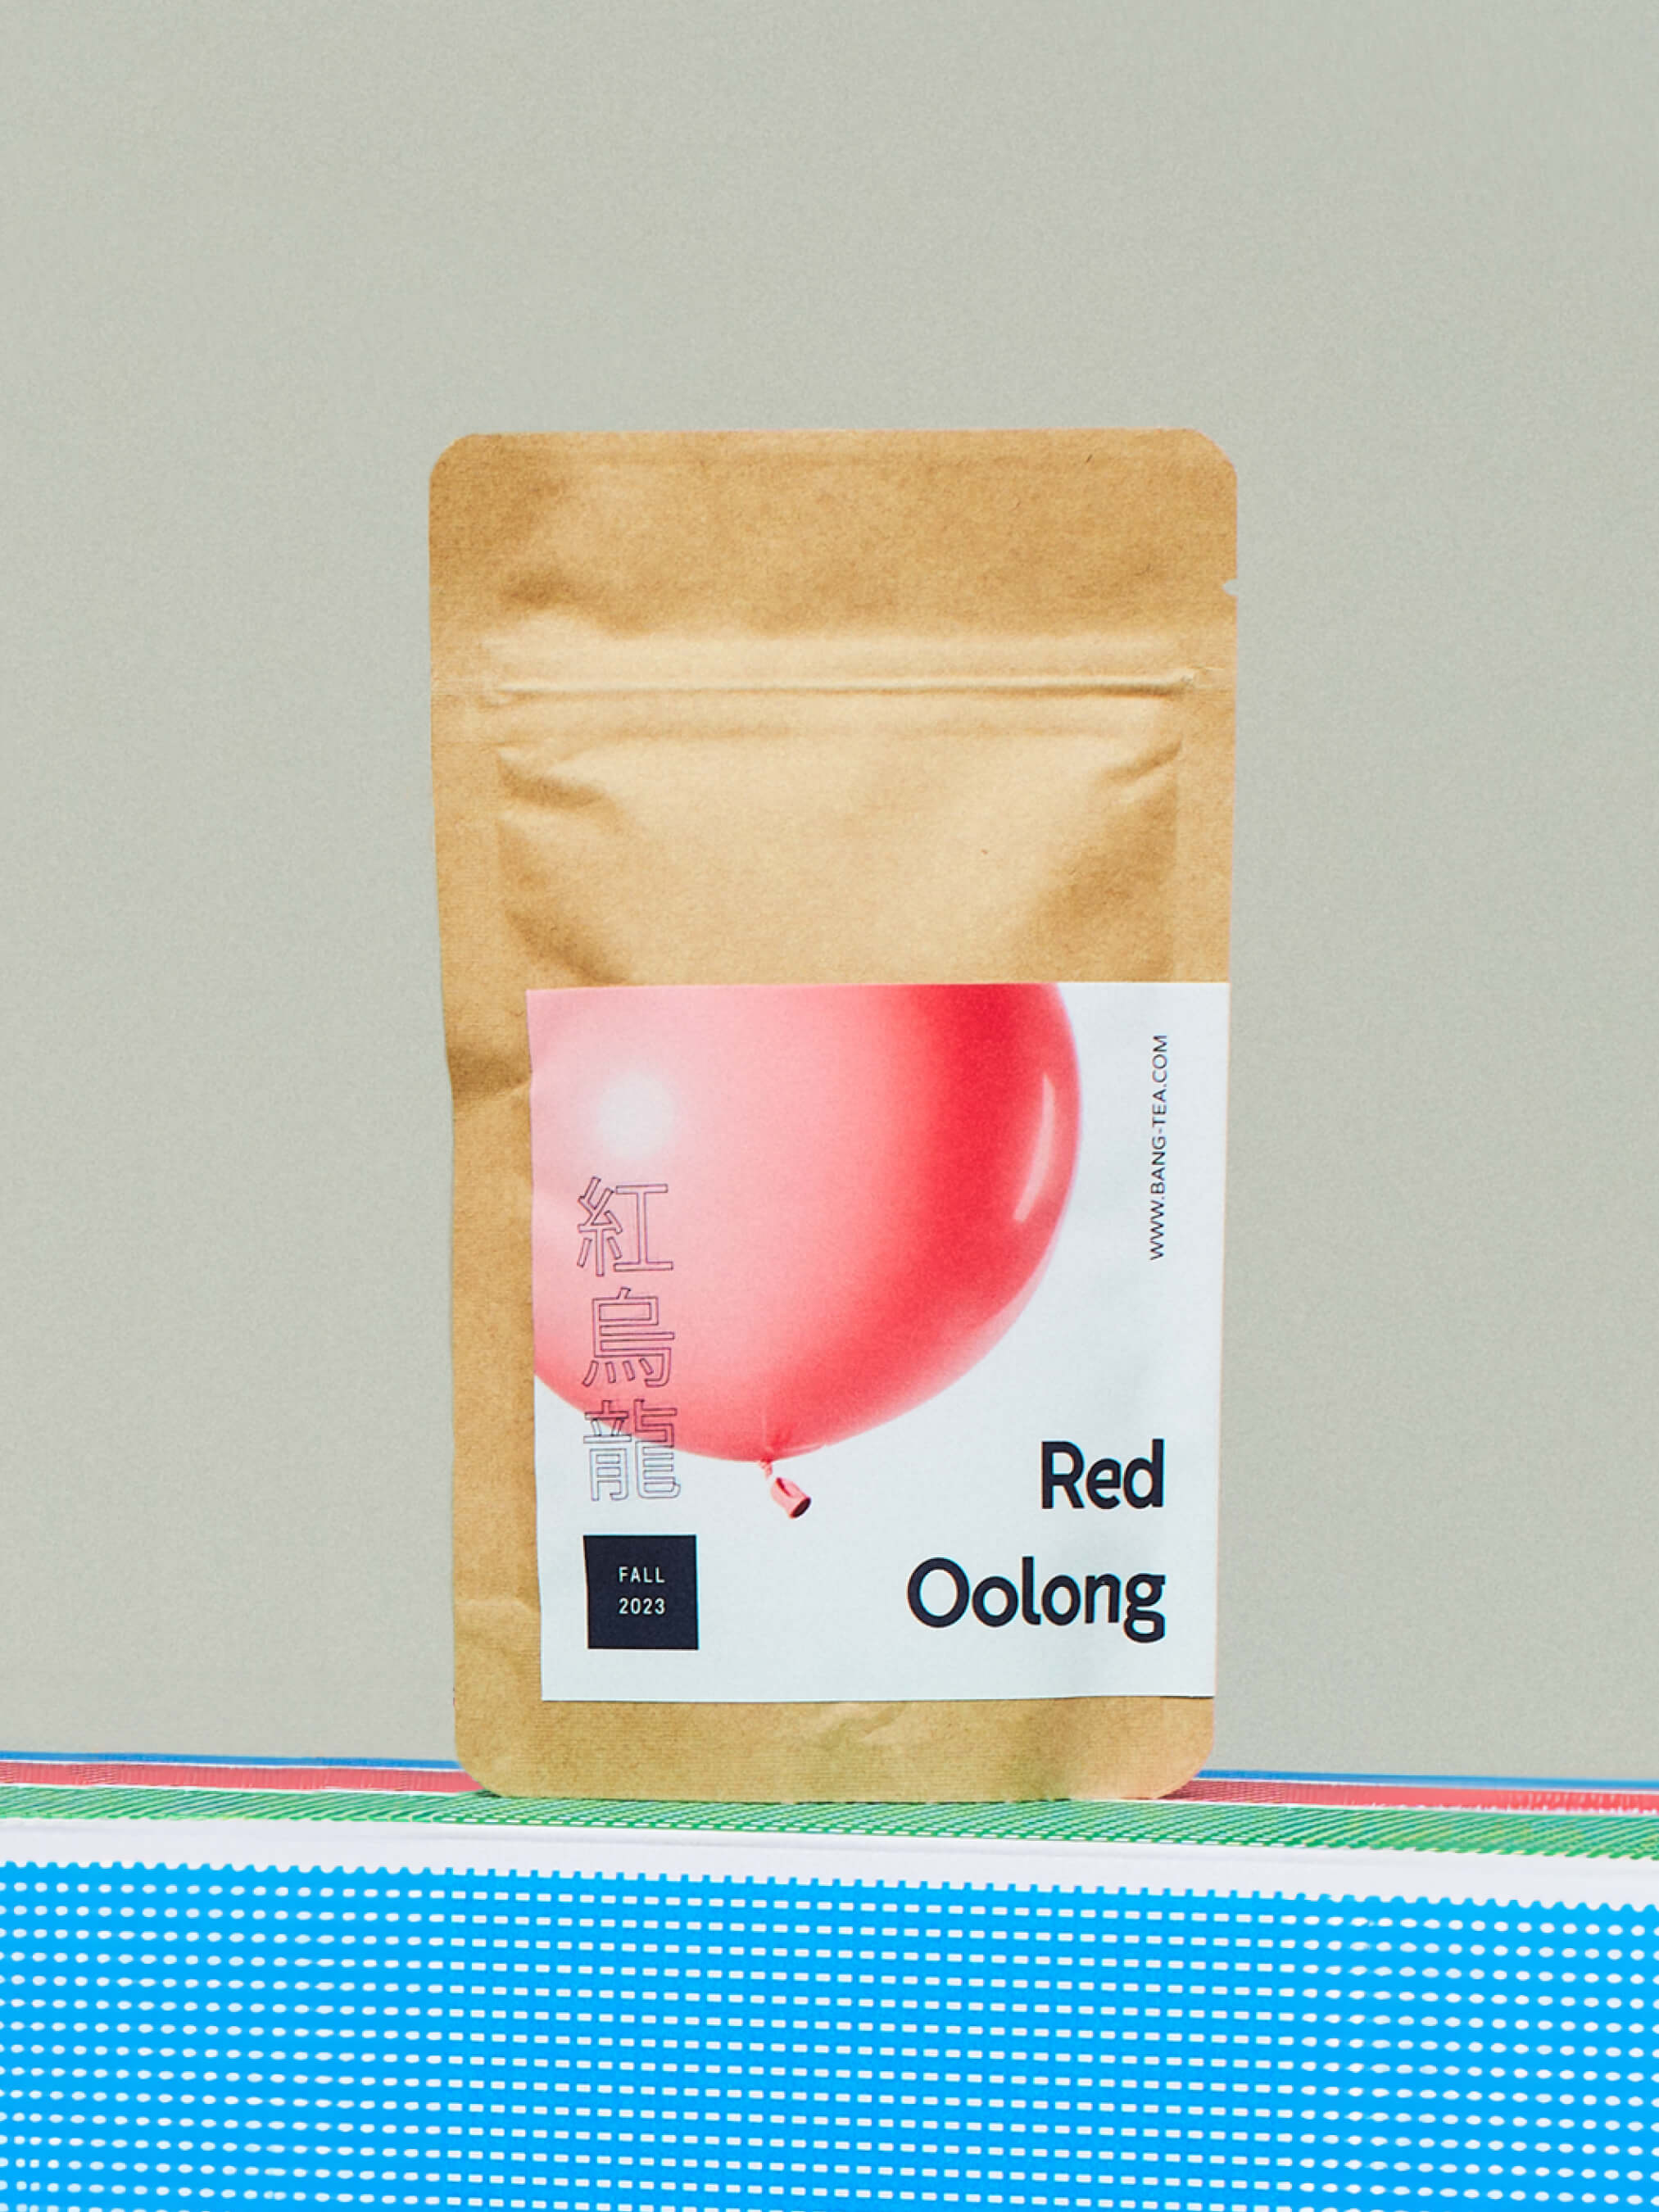 Red Oolong (Fall '23)